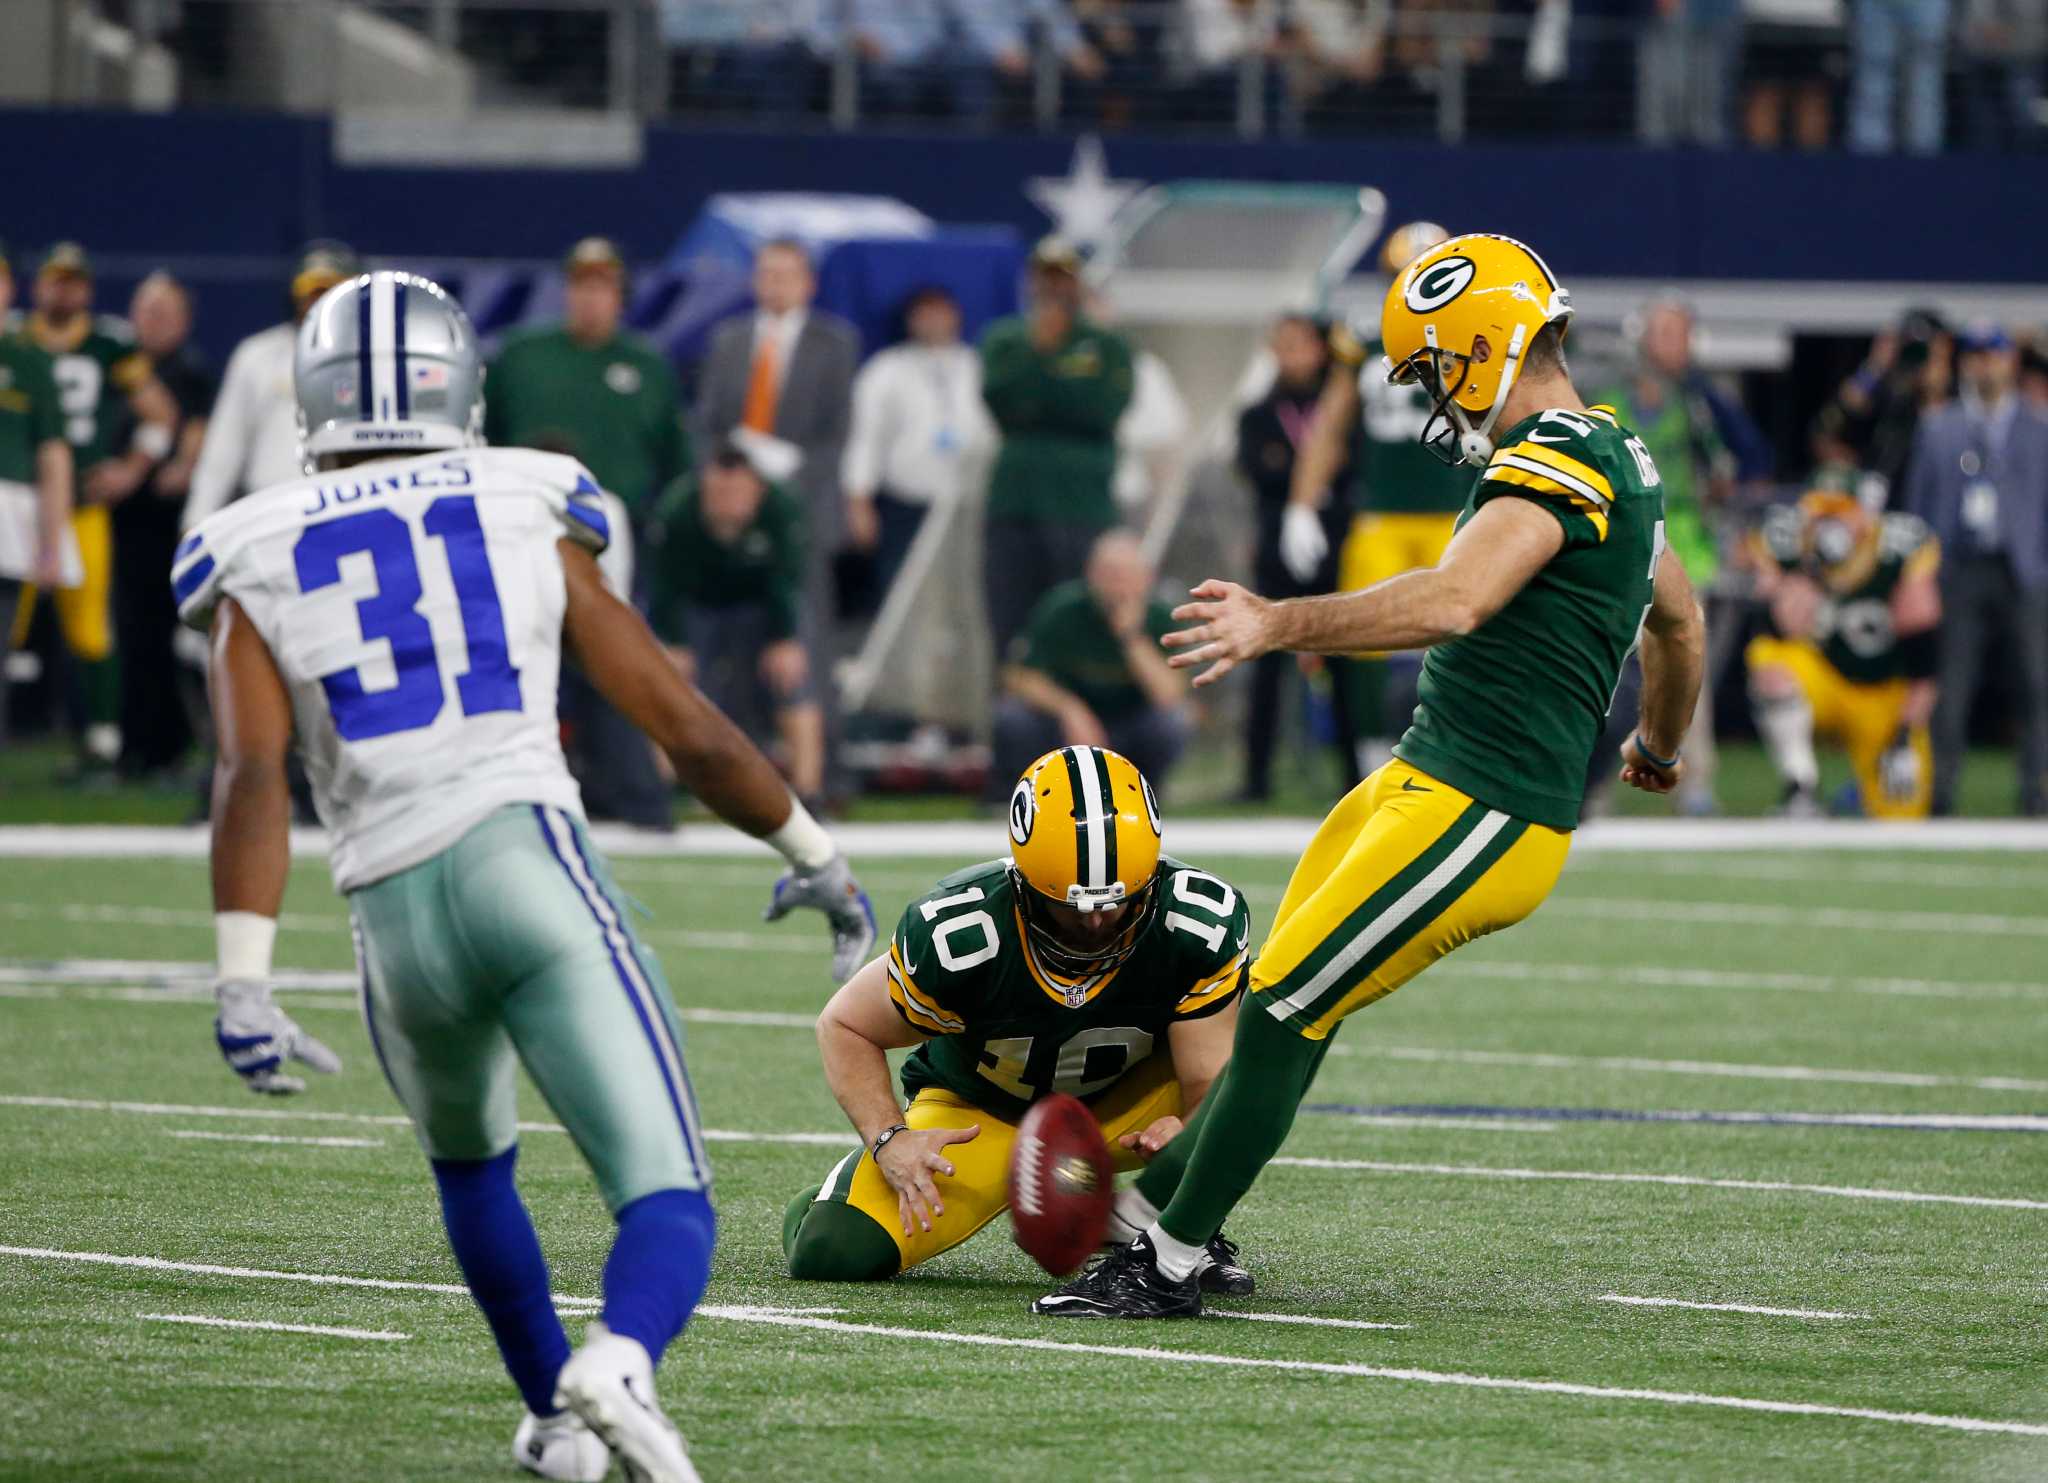 NFL: Clutch Rodgers leads Packers past rallying Cowboys, 34-31